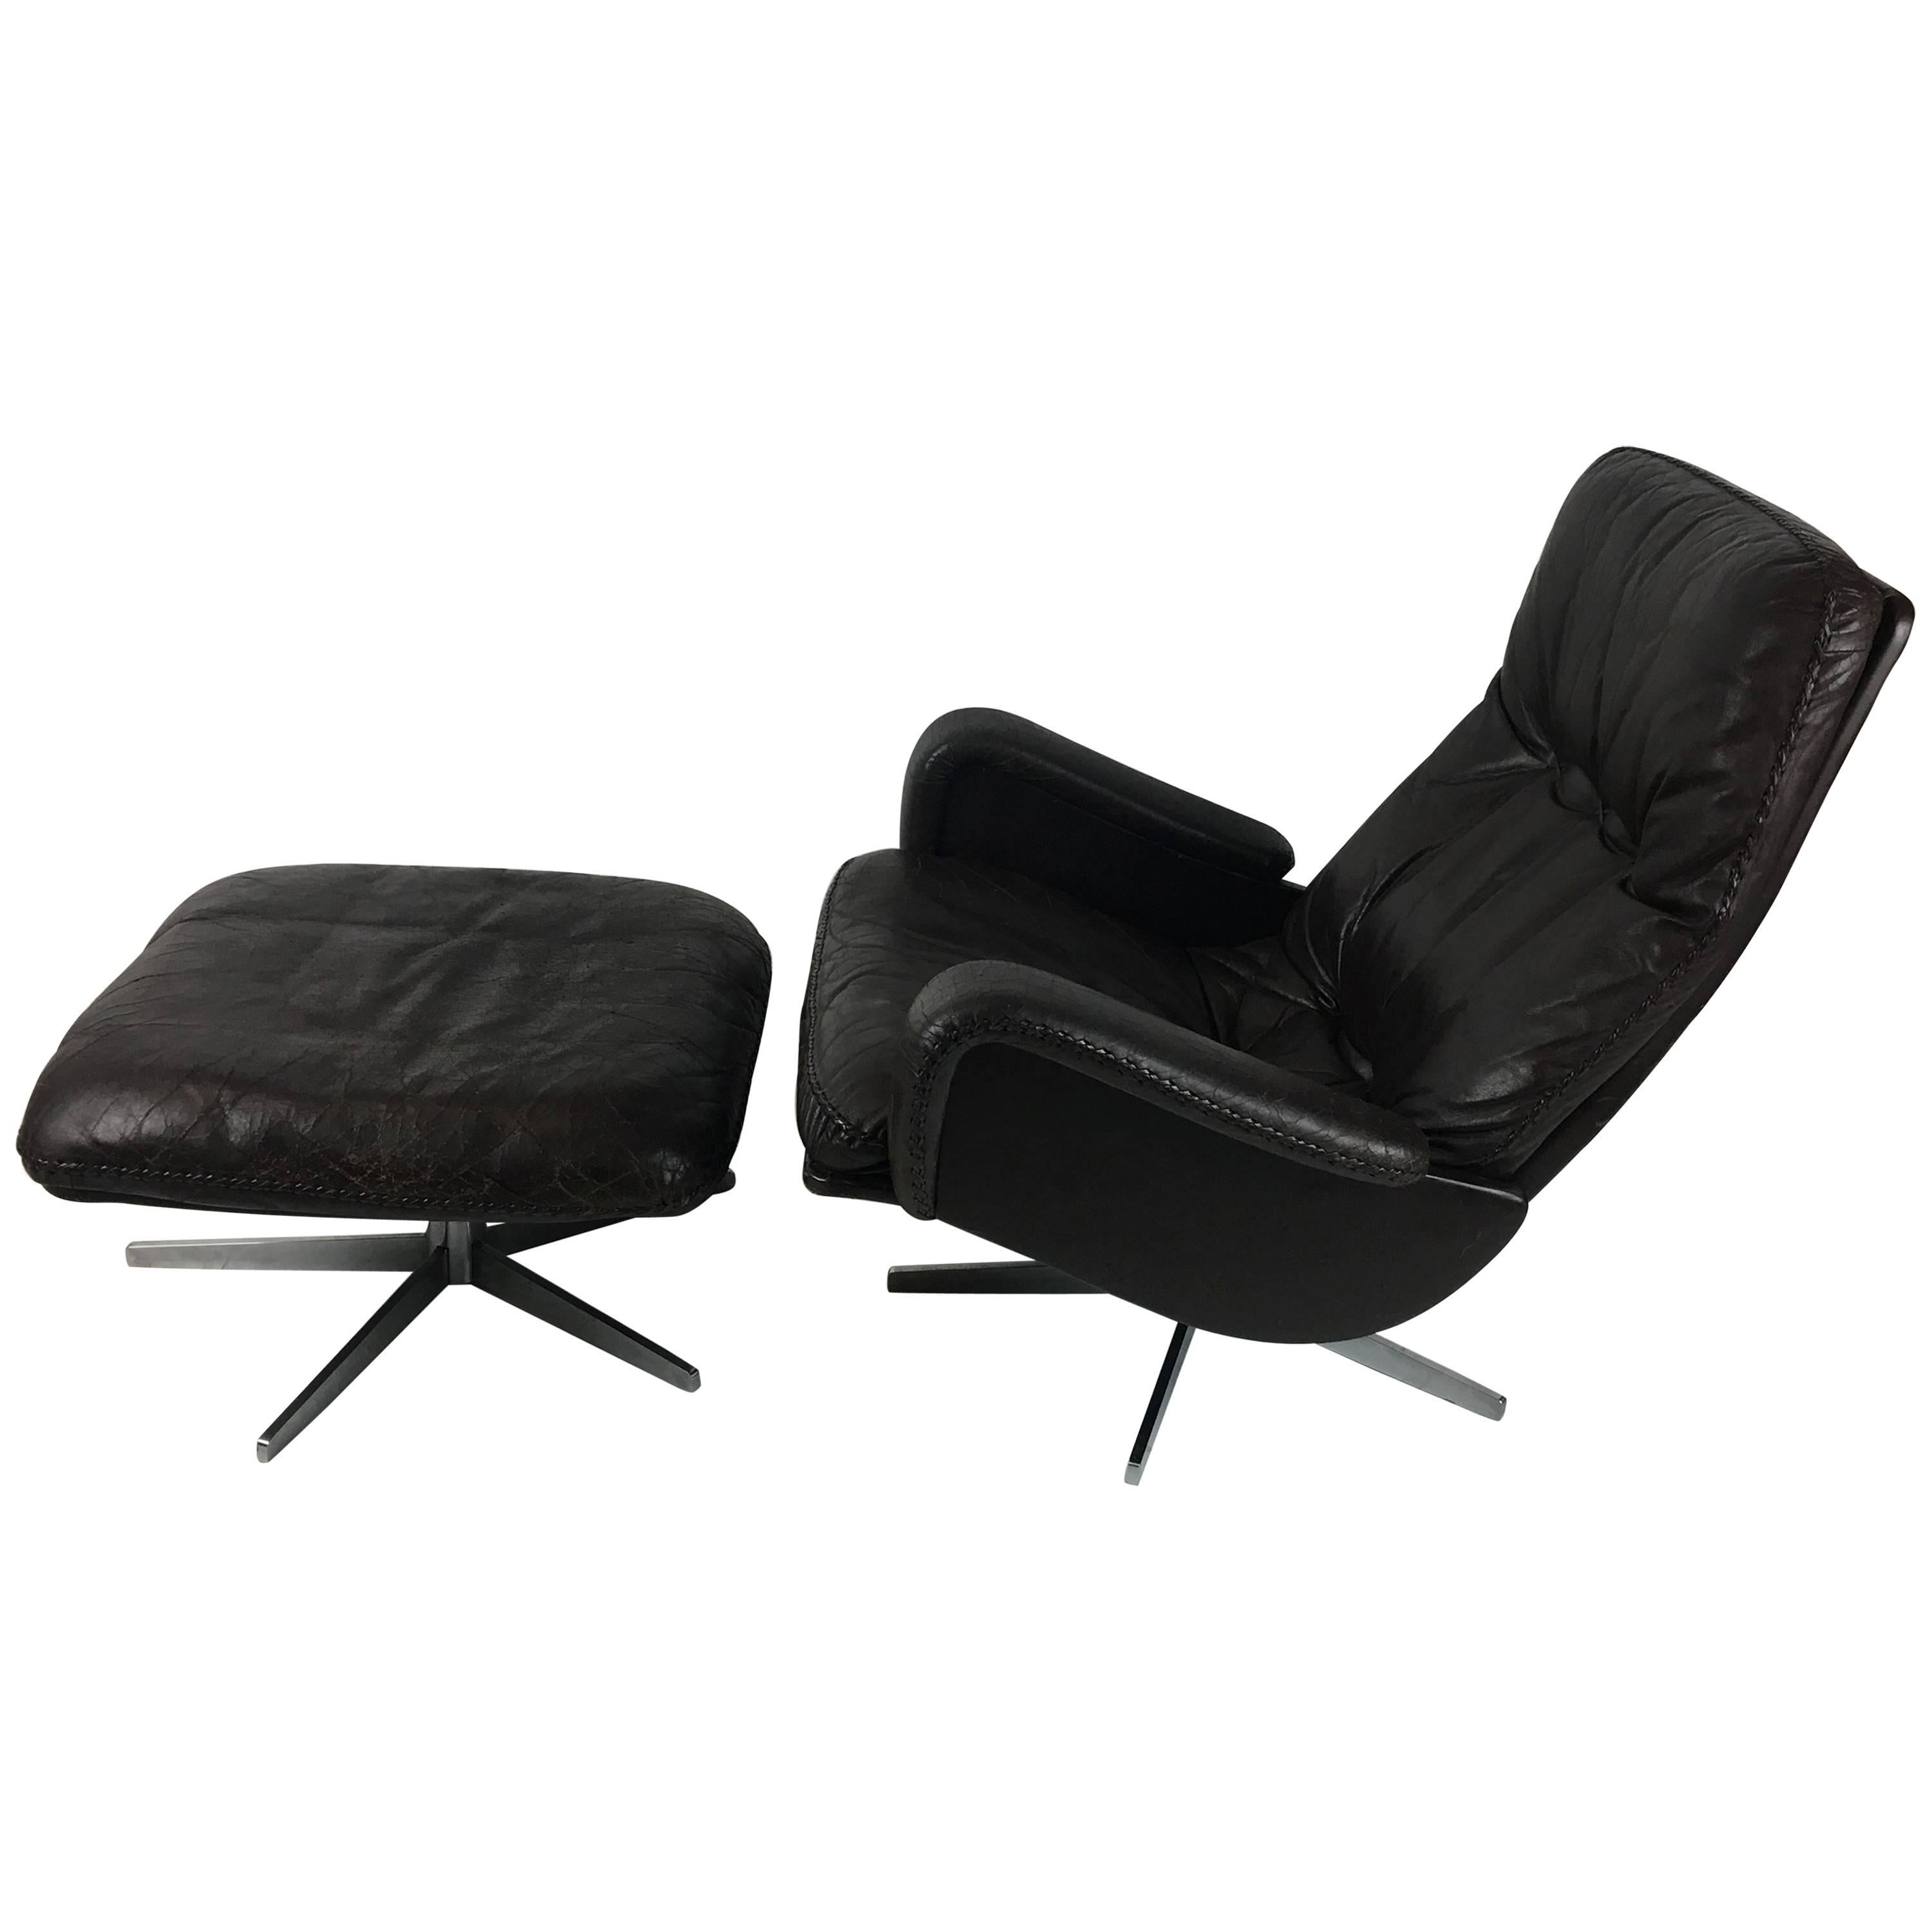 De Sede "James Bond" S231 Lounge Chair with Ottoman For Sale at 1stDibs